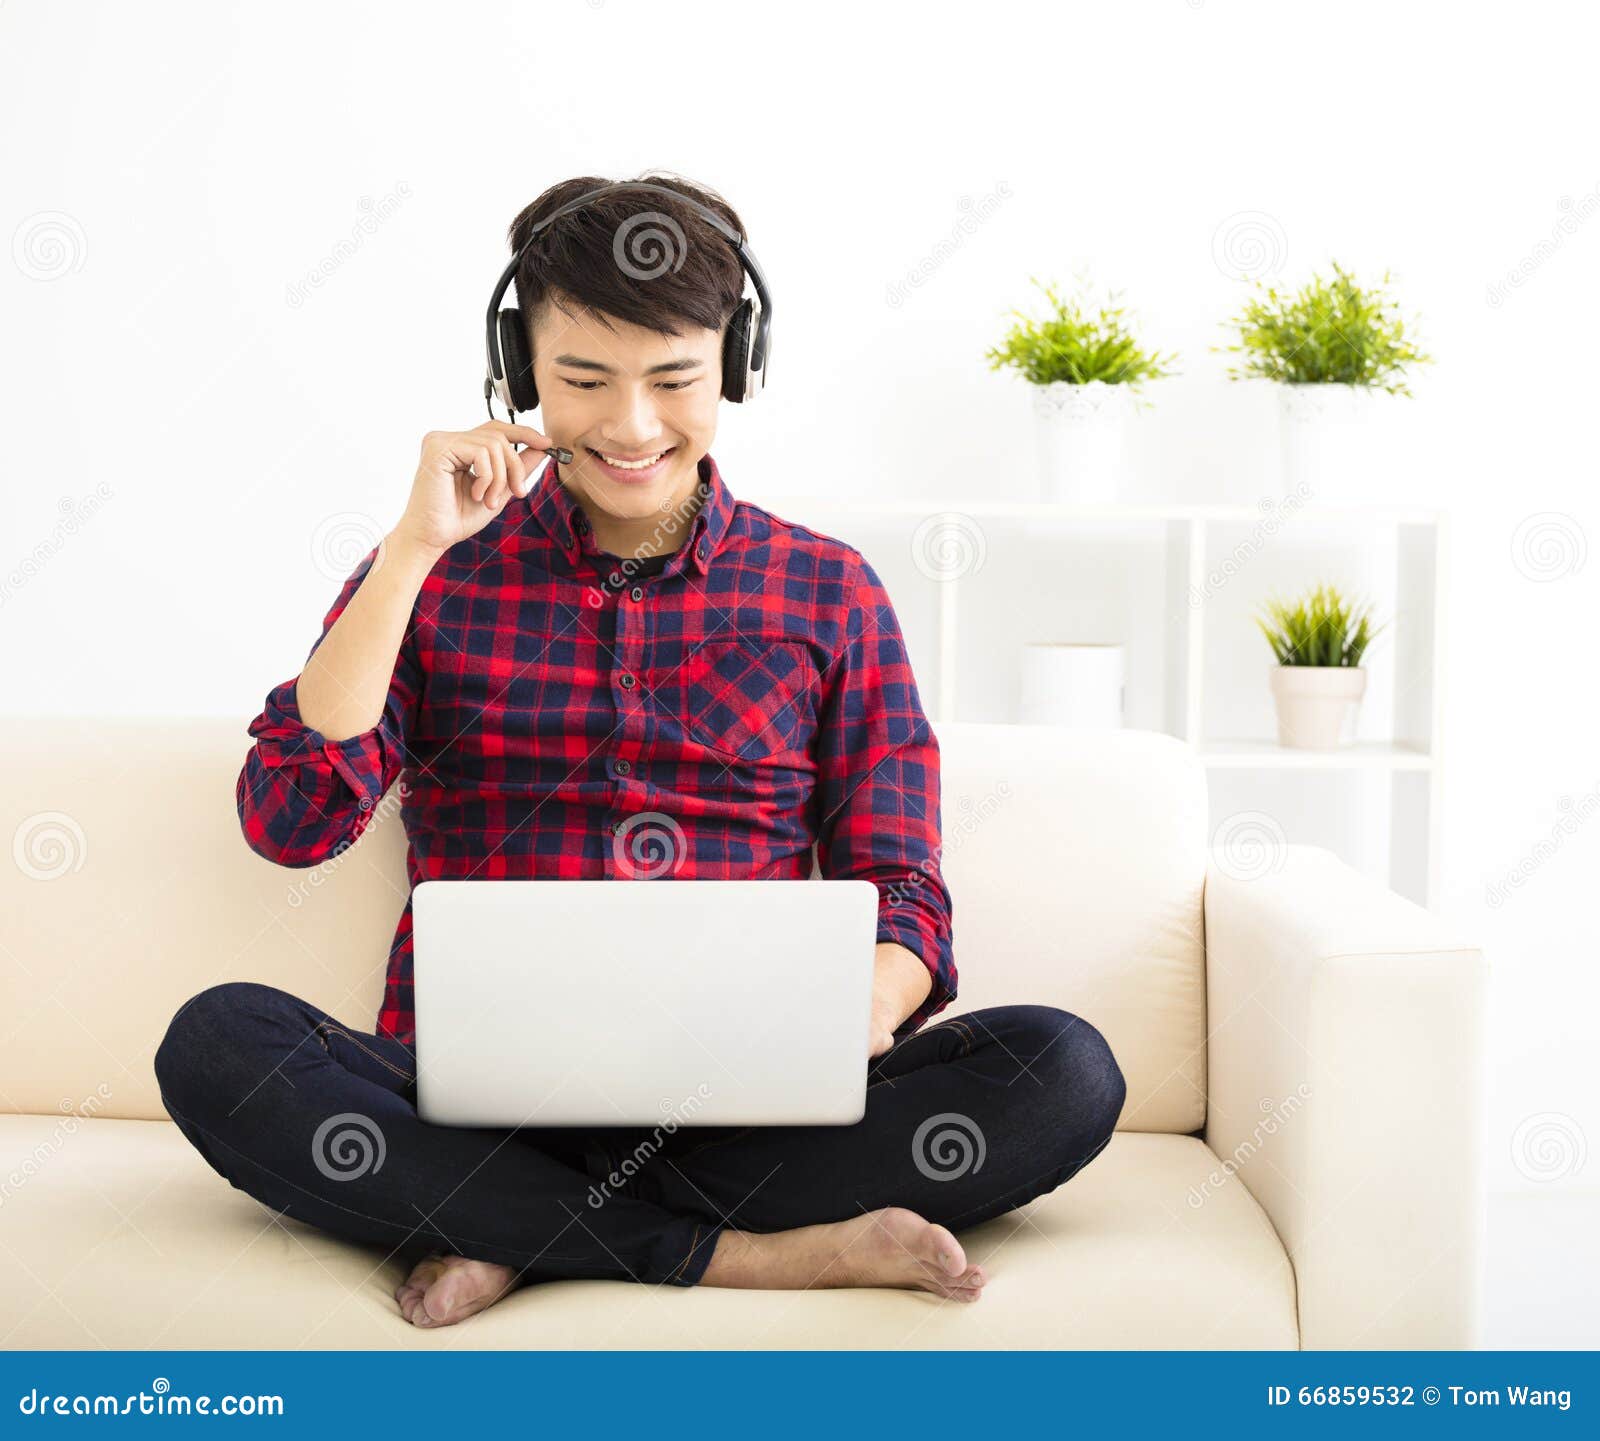 young man using laptop computer with headset